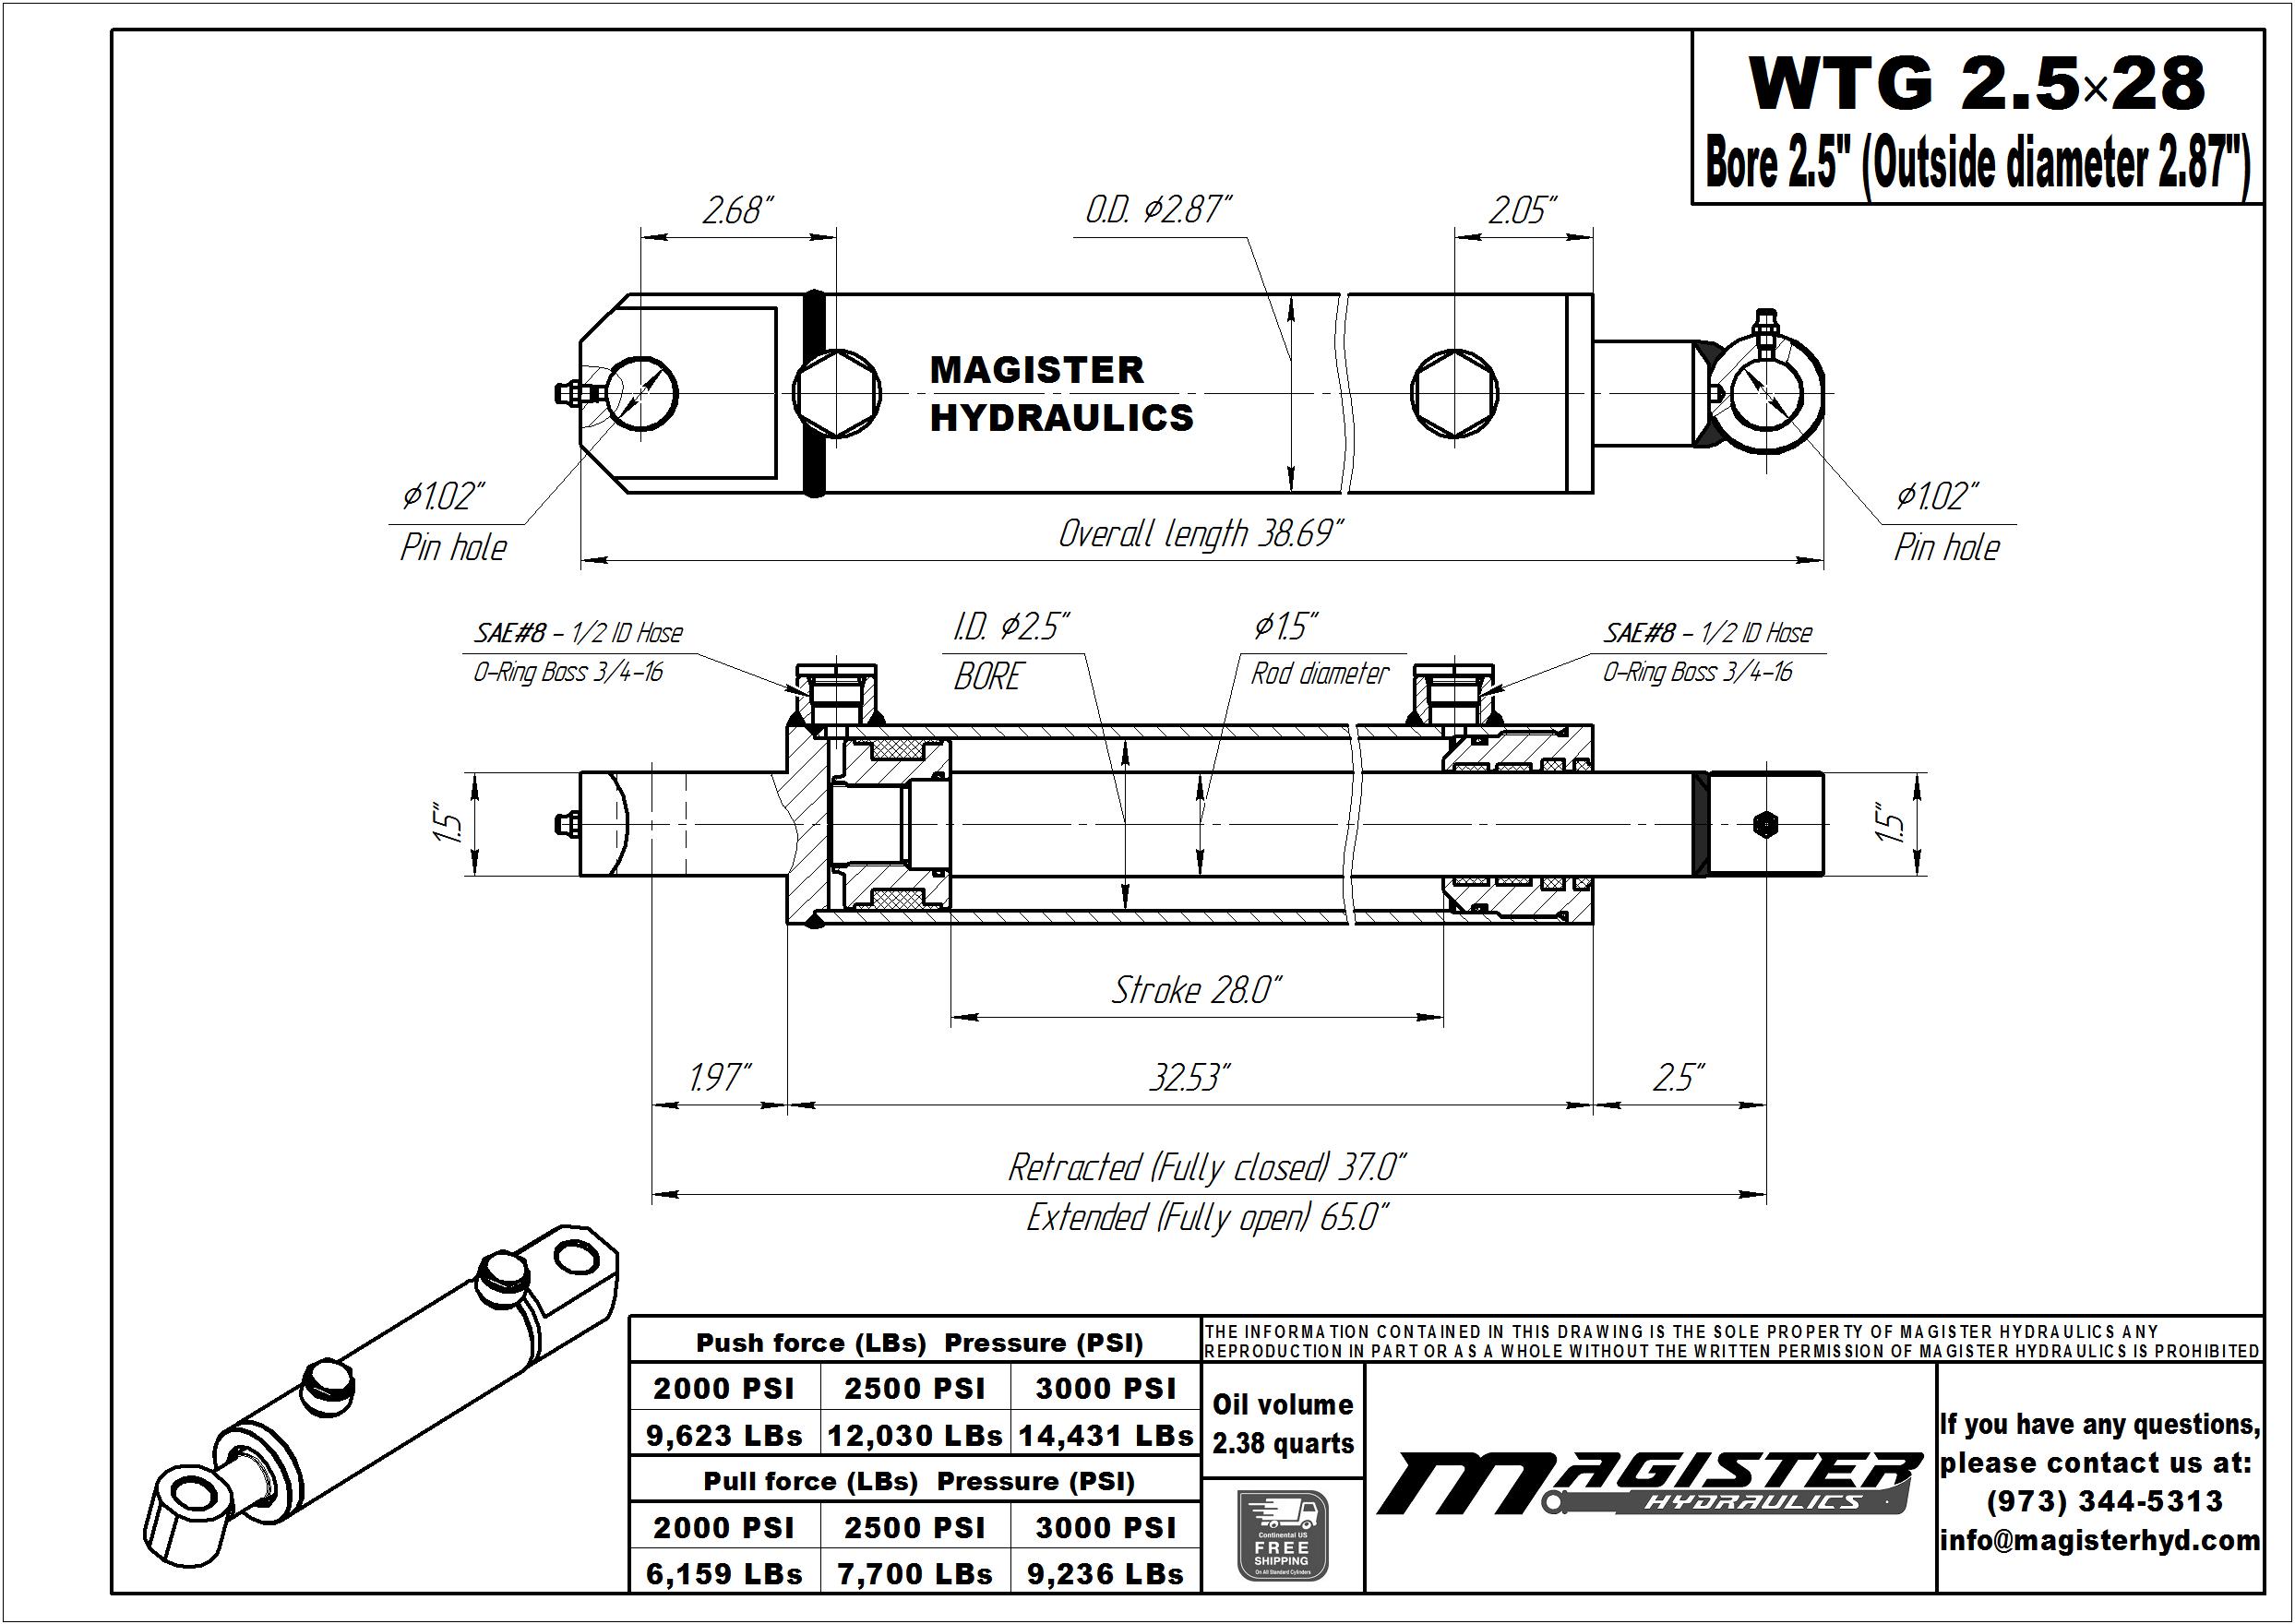 2.5 bore x 28 stroke hydraulic cylinder, welded tang double acting cylinder | Magister Hydraulics